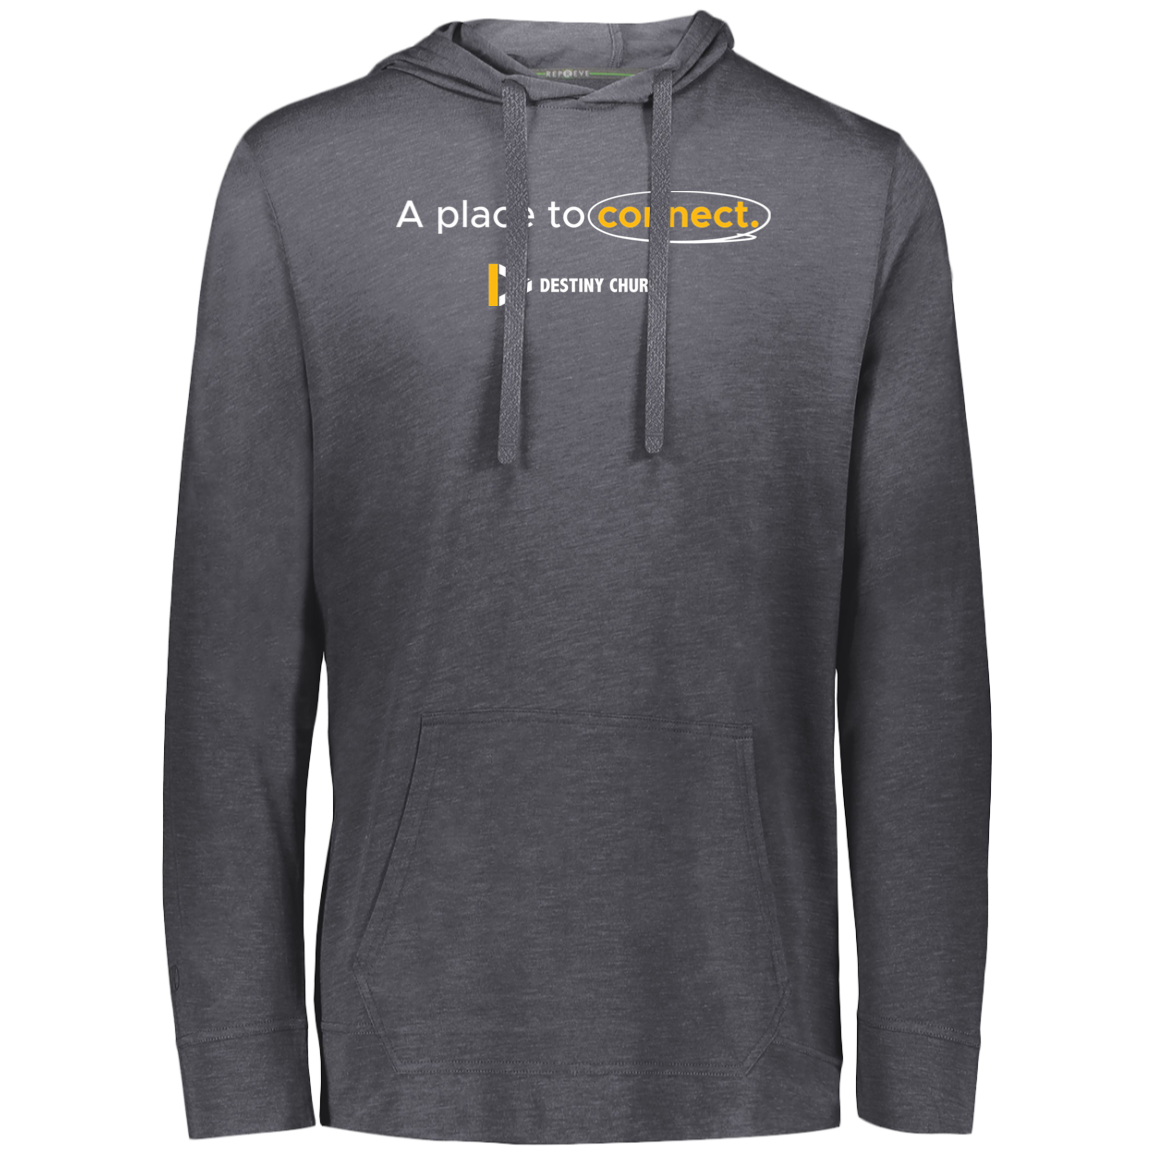 A Place to Connect - Hoodies